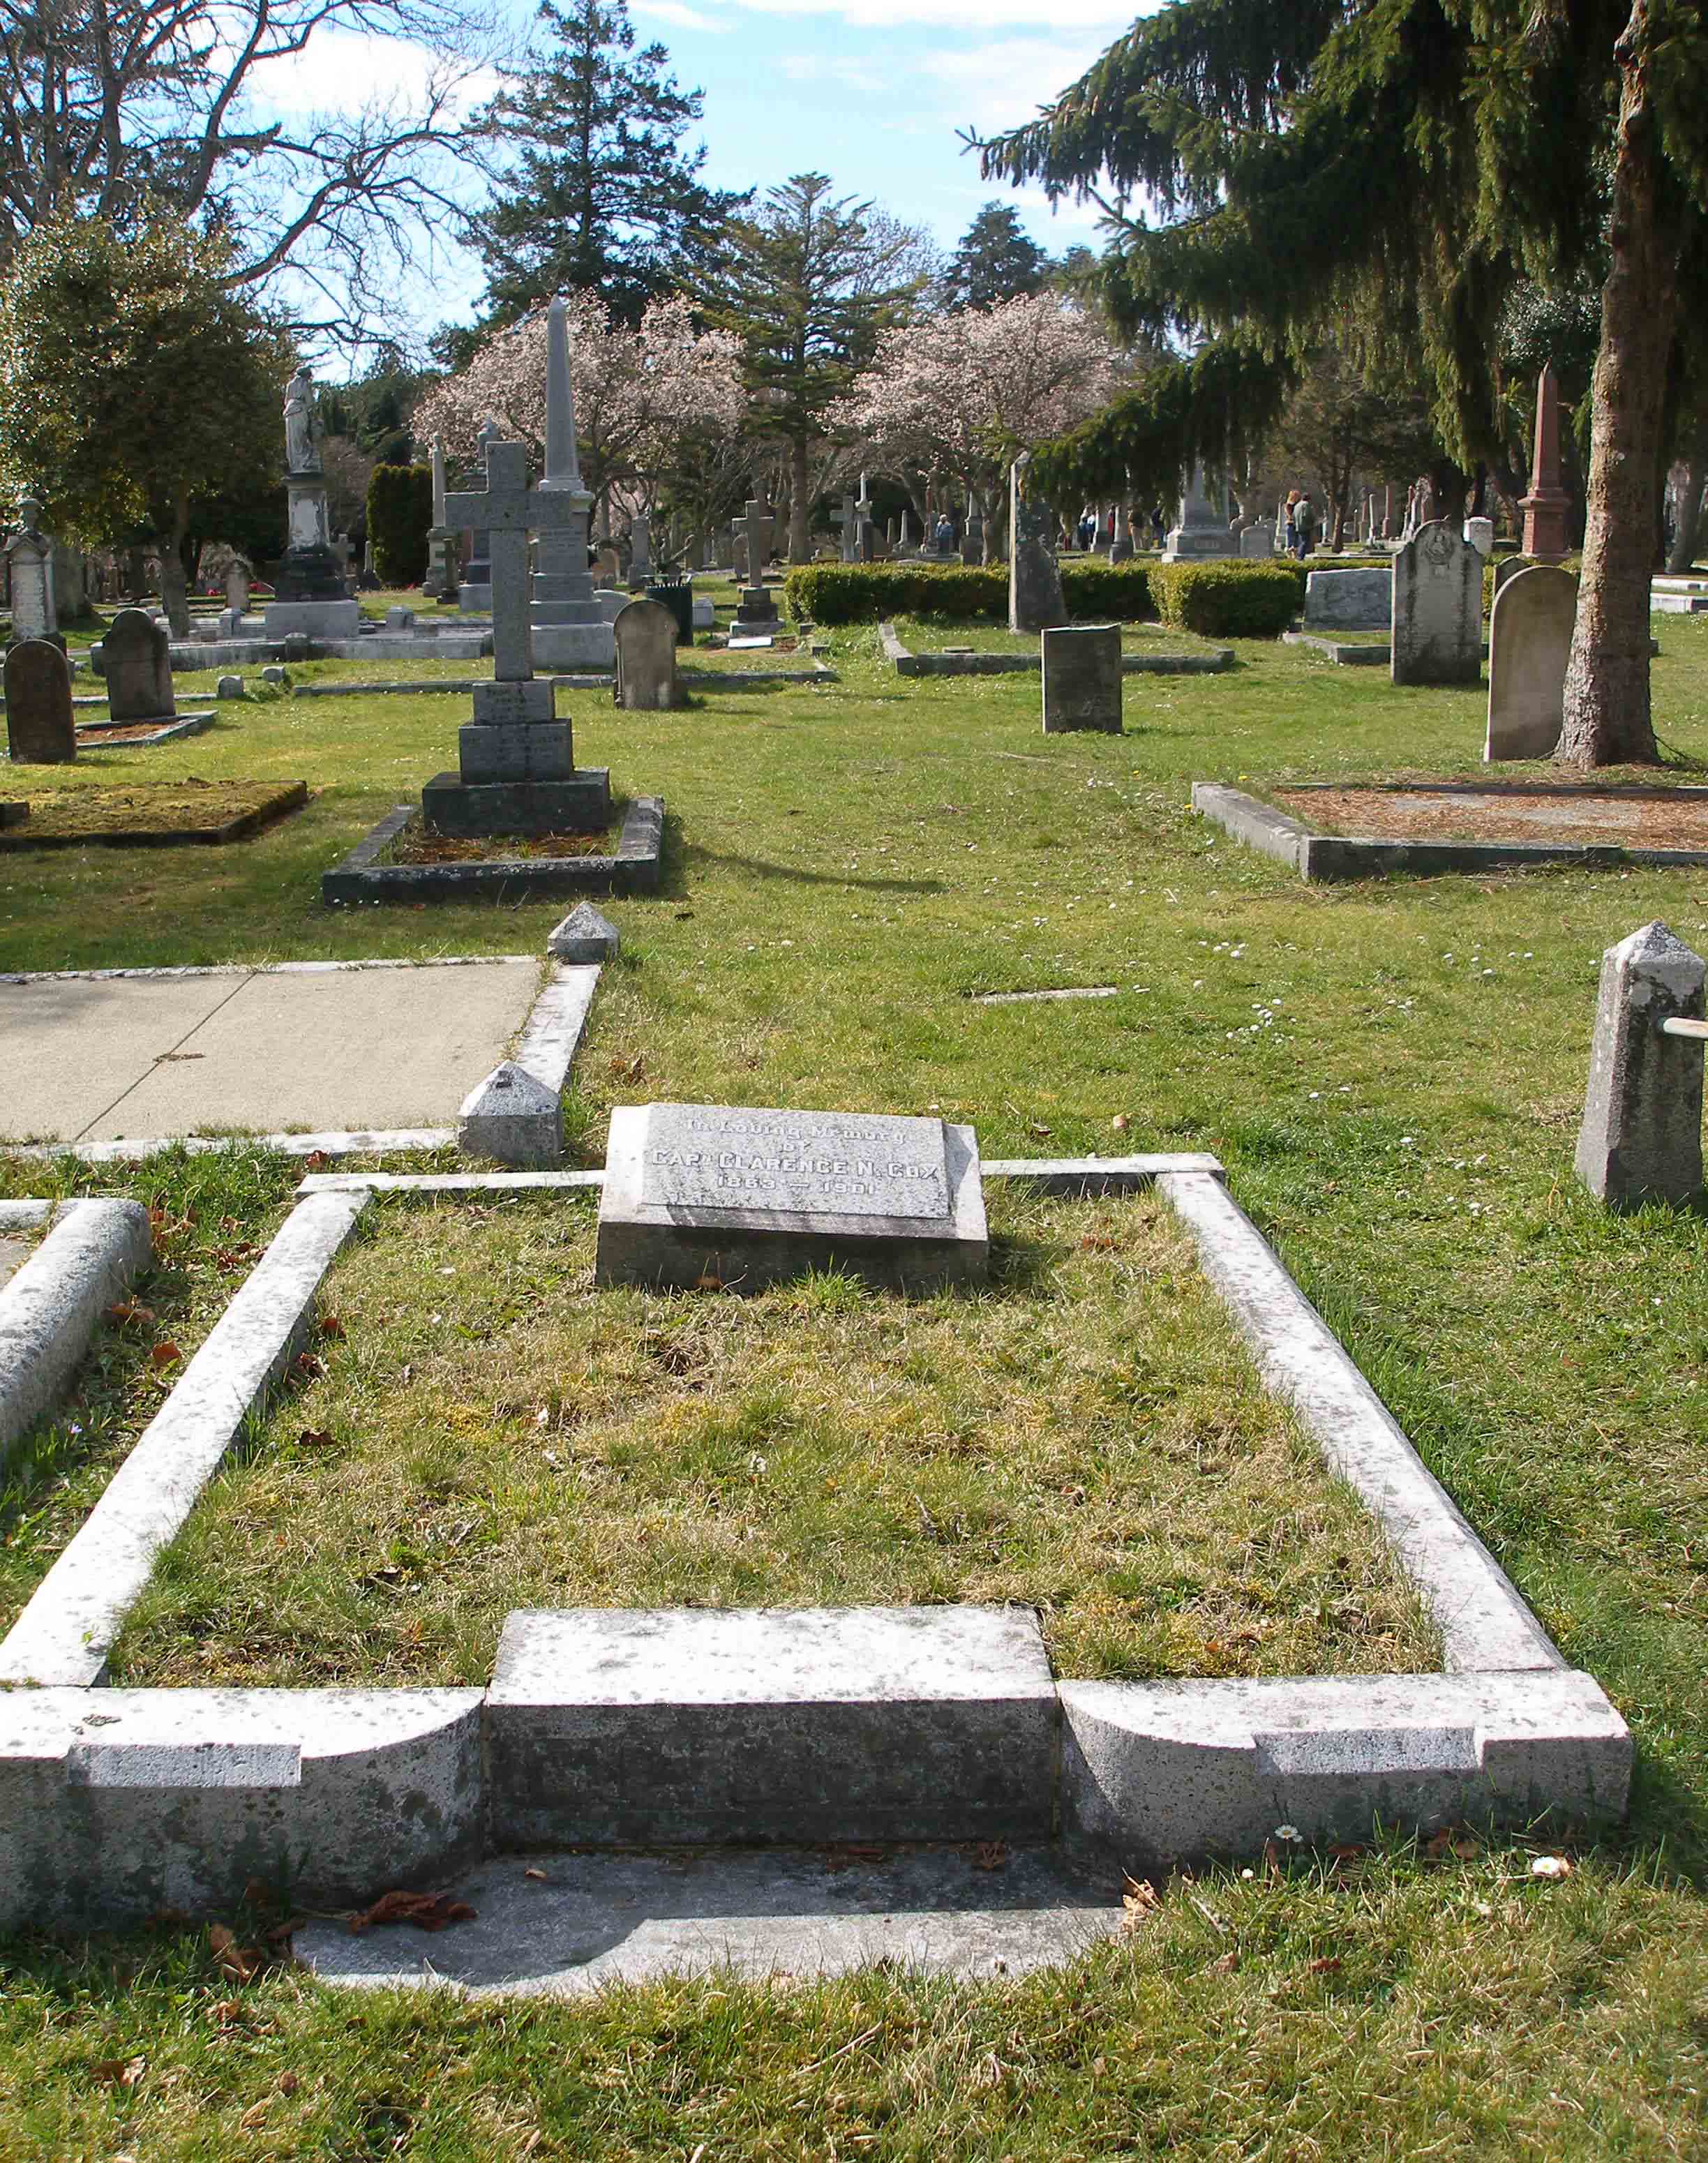 Captain Clarence Cox grave site, Ross Bay Cemetery